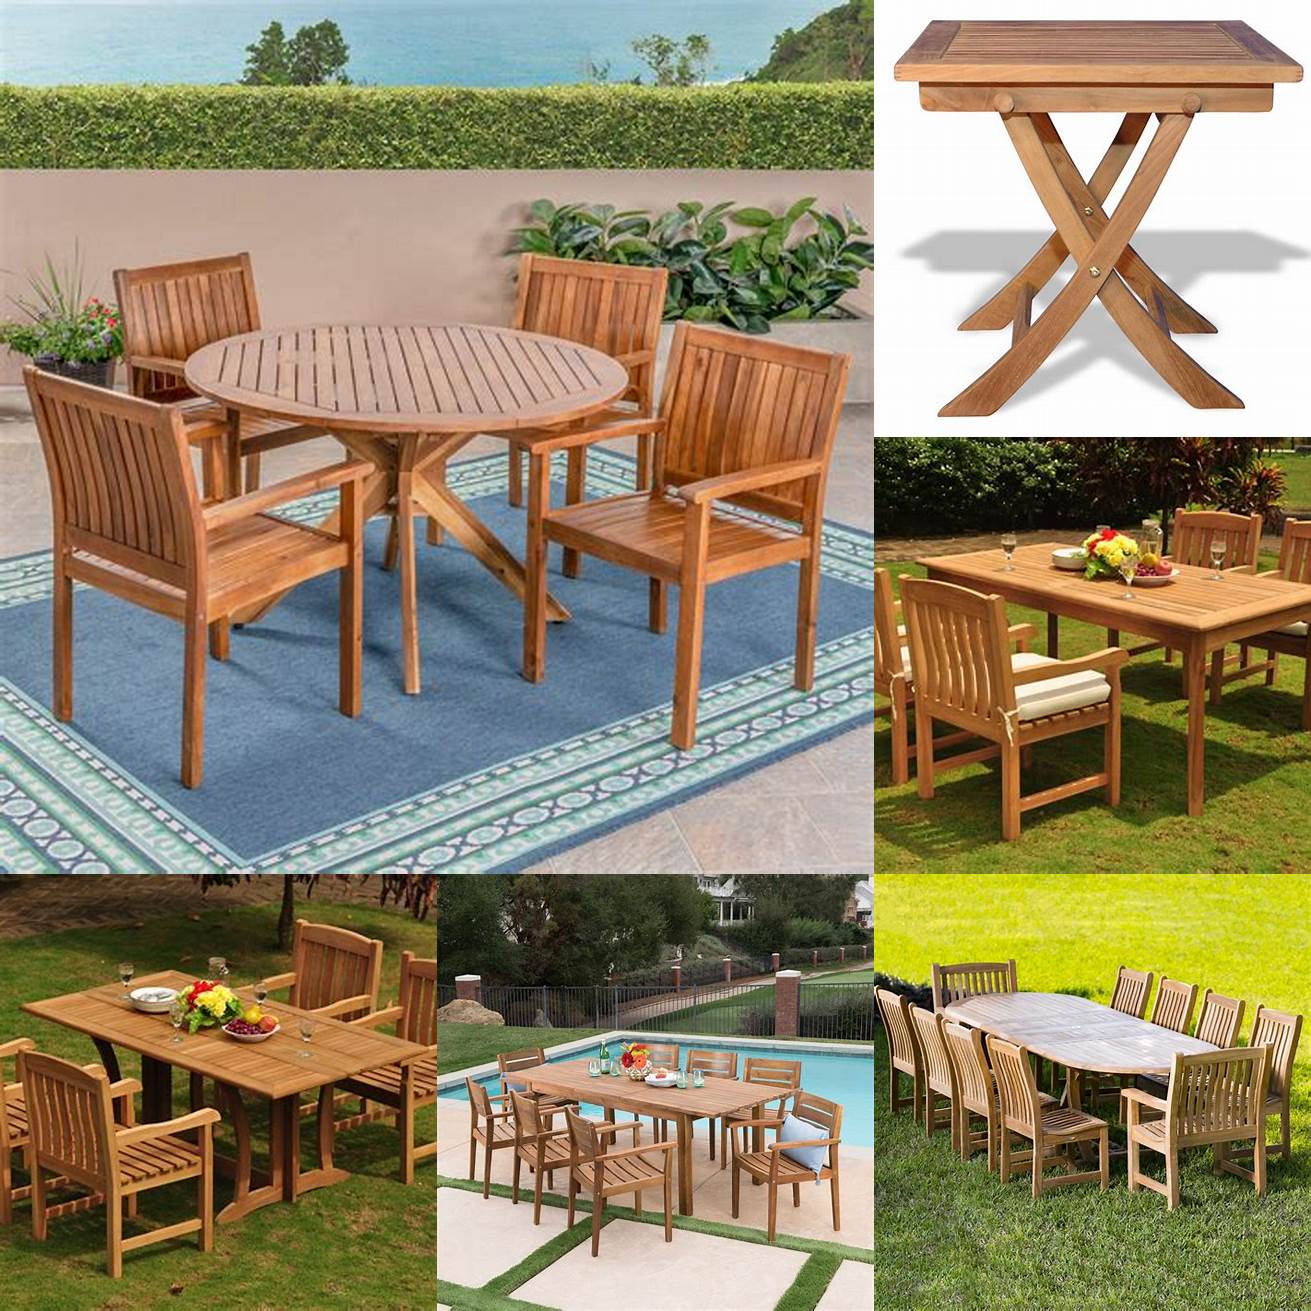 Teak Wood Patio Table with Table Cover